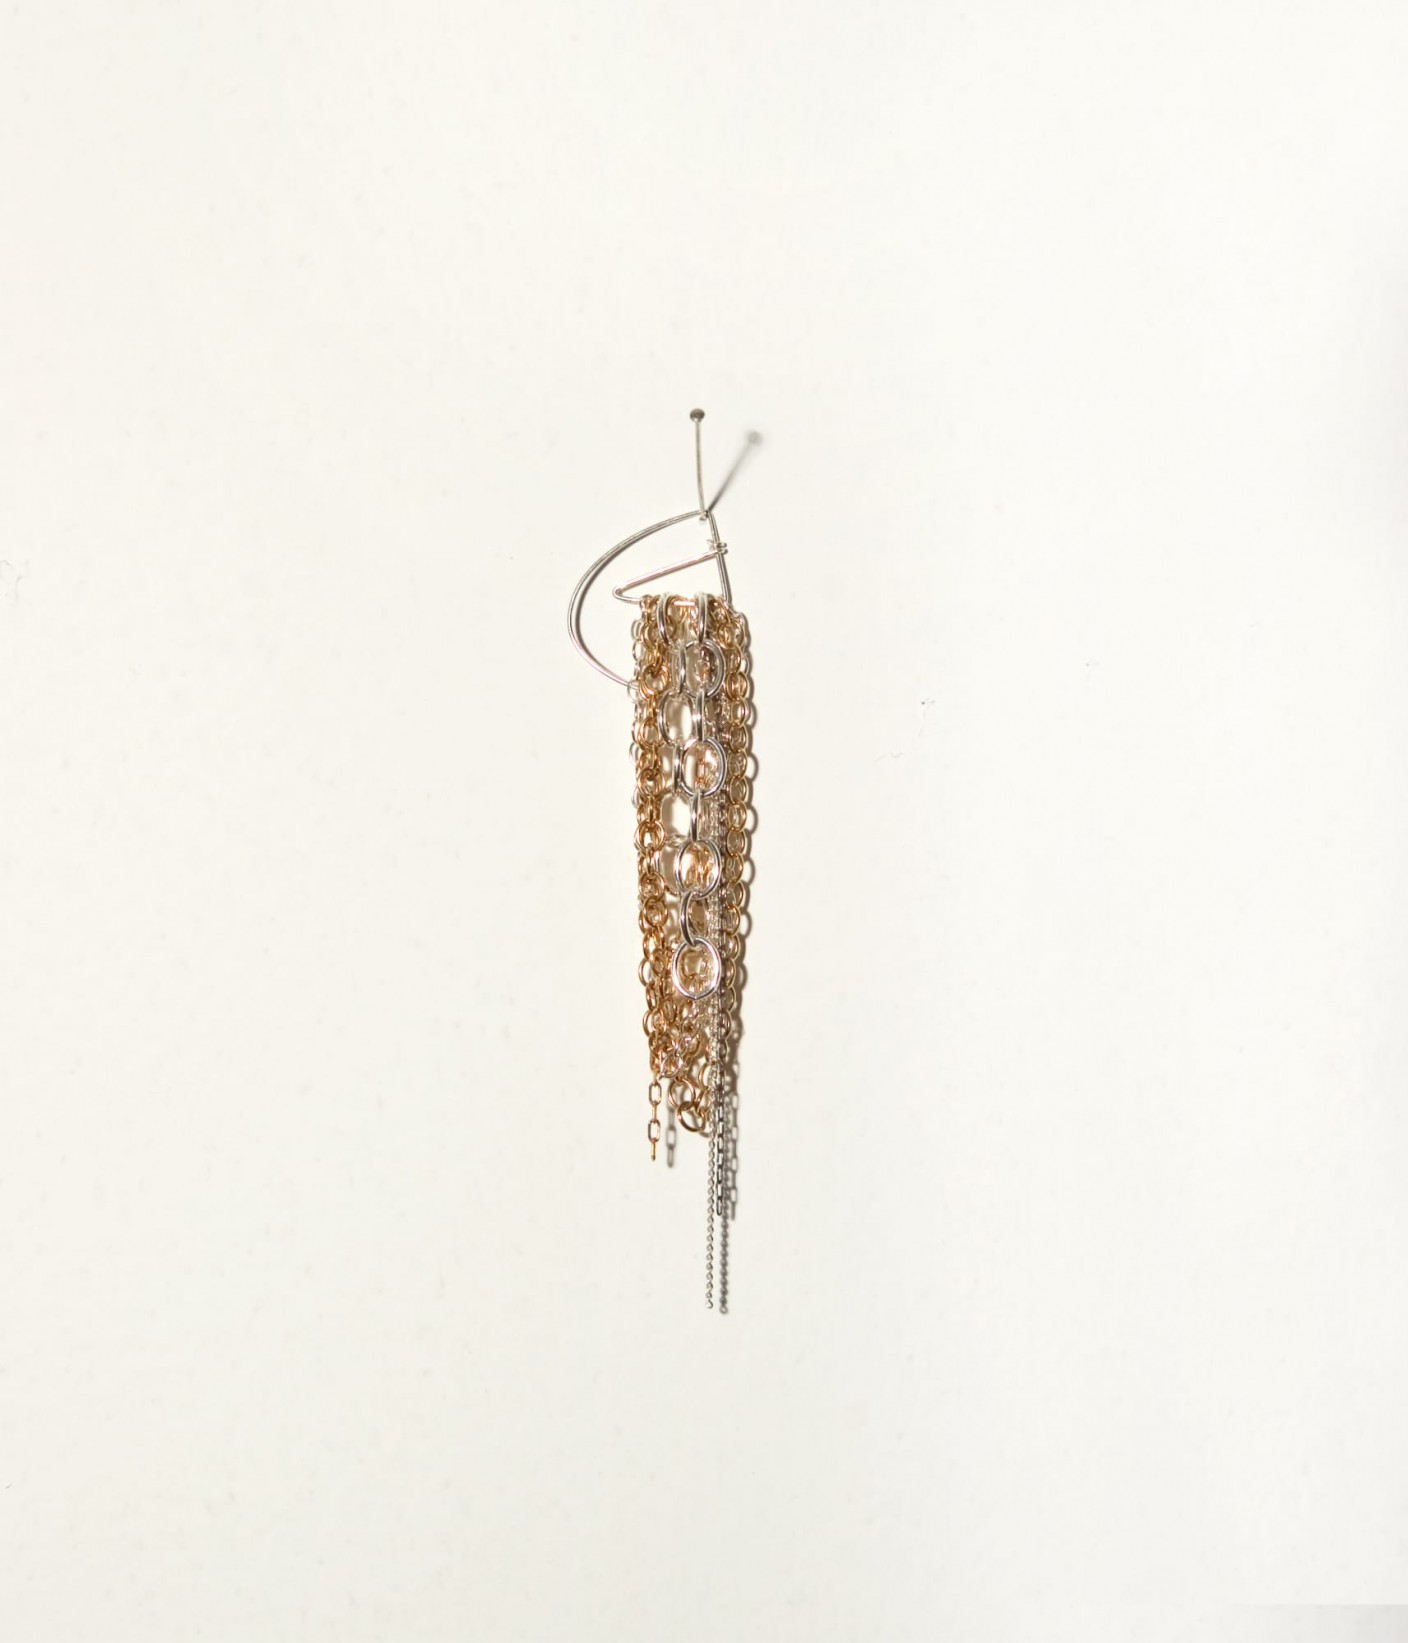 An earring made up of several small chains hanging from a large loop